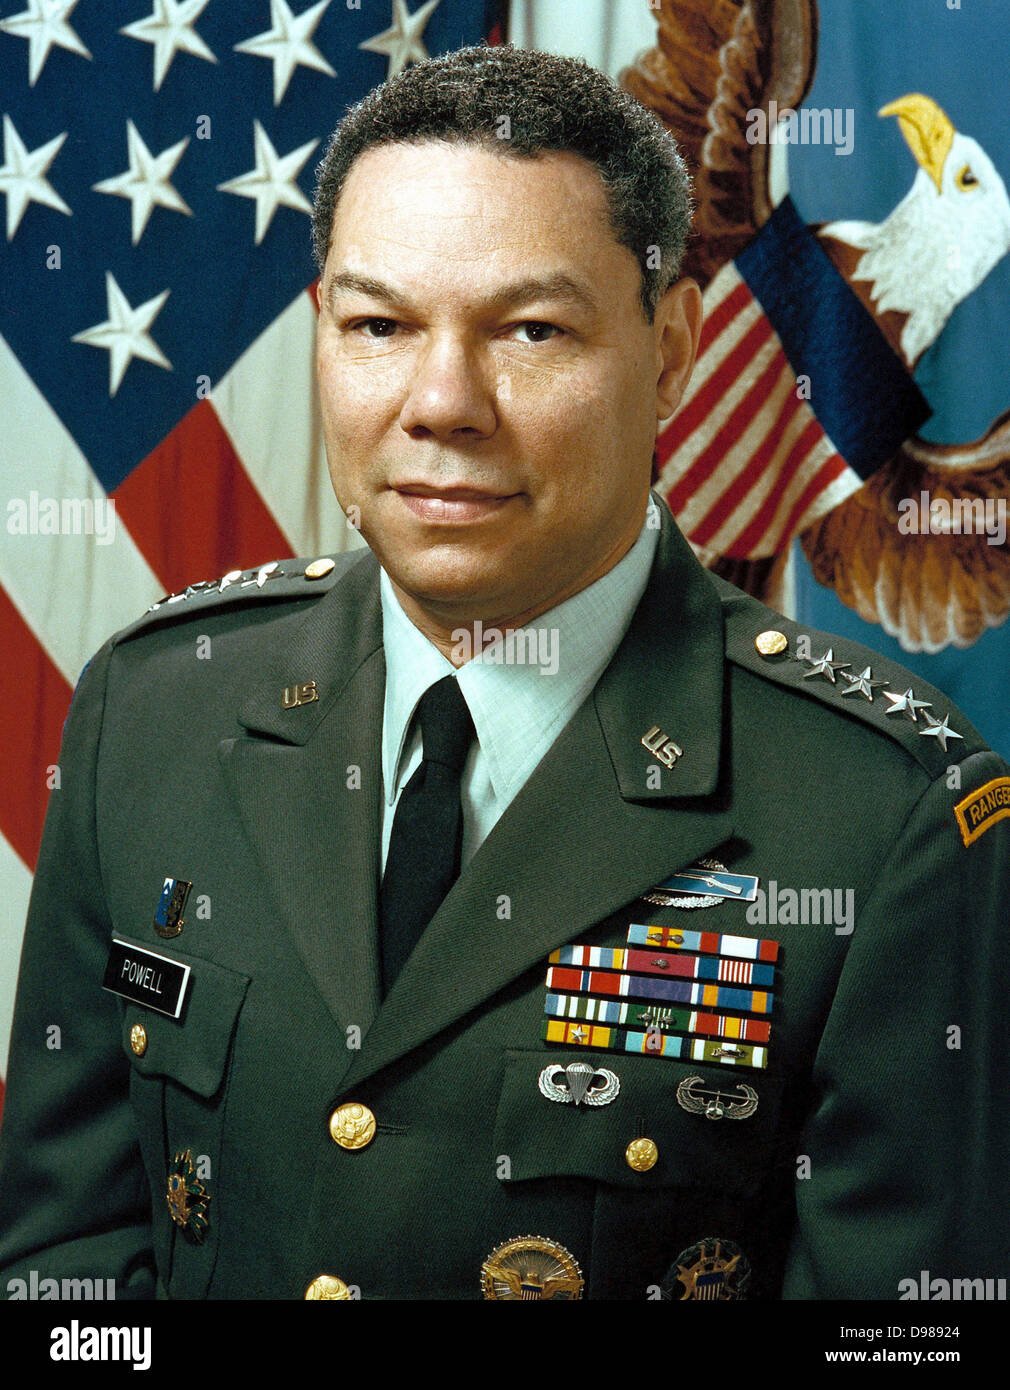 Colin Luther Powell born April 5, 1937 American statesman and a retired four-star general in the United States Army. He was the 65th United States Secretary of State (2001–2005), serving under President George W. Bush. He was the first African American appointed to that position.[1][2][3][4] During his military career, Powell also served as National Security Advisor (1987–1989), as Commander of the U.S. Army Forces Command (1989) and as Chairman of the Joint Chiefs of Staff (1989–1993), Stock Photo